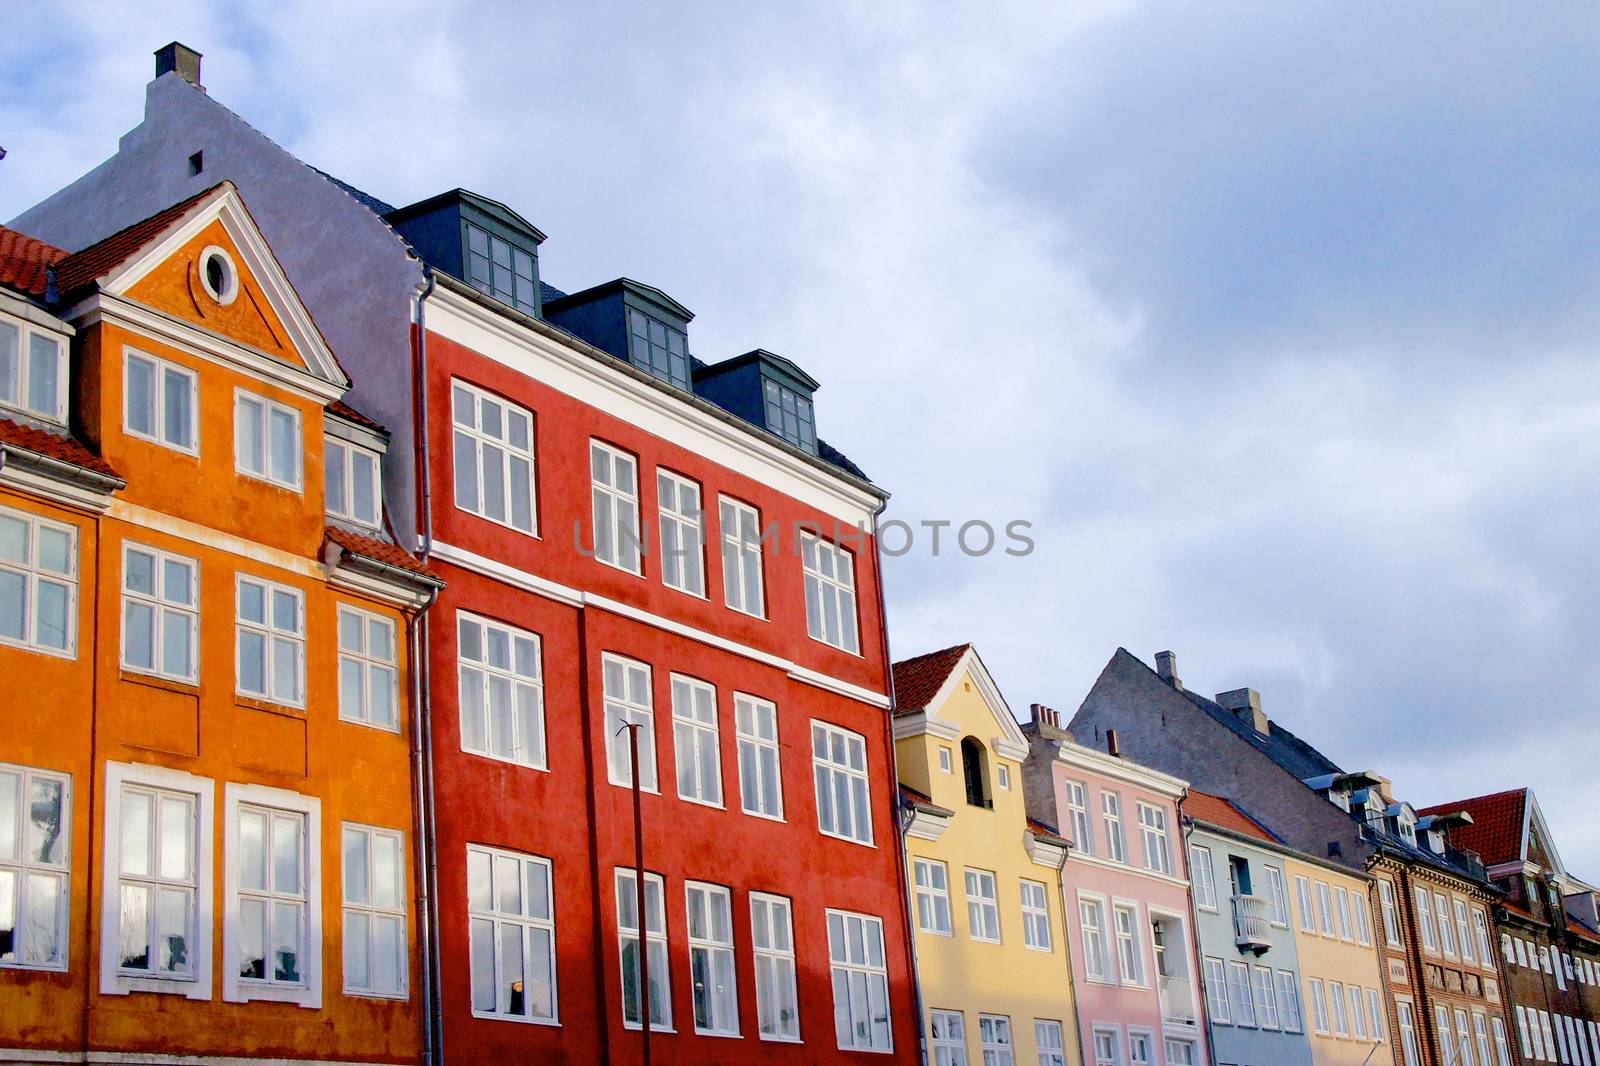 Wall of Colorful Houses with Attic Windows against Blue Sky Outdoors. Copenhagen, Denmark